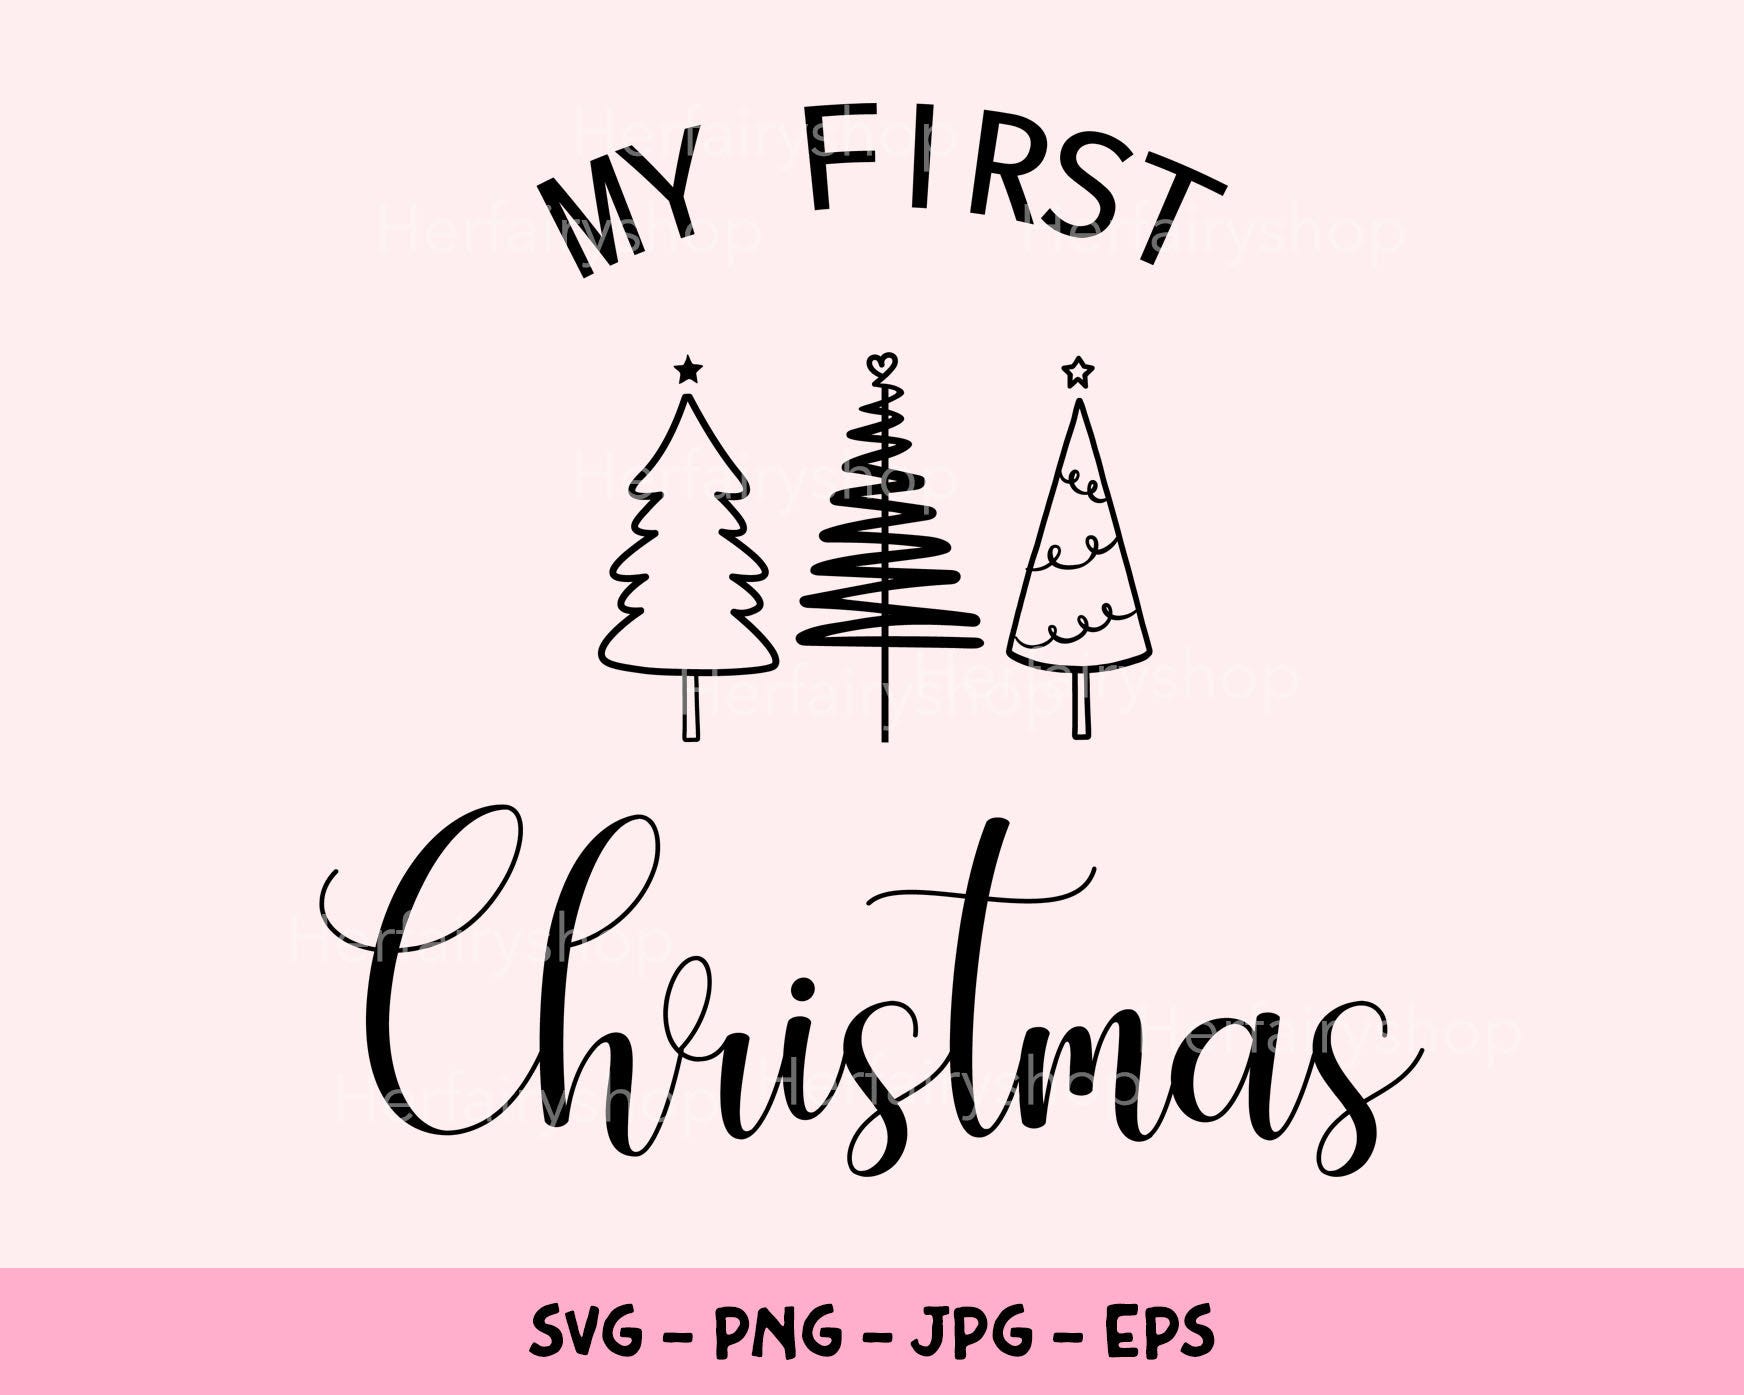 My First Christmas SVG, Babys First Christmas, 1st Christmas SVG, Newborn 1st Christmas, Minimal Christmas Svg, Cricut File, Silhouette